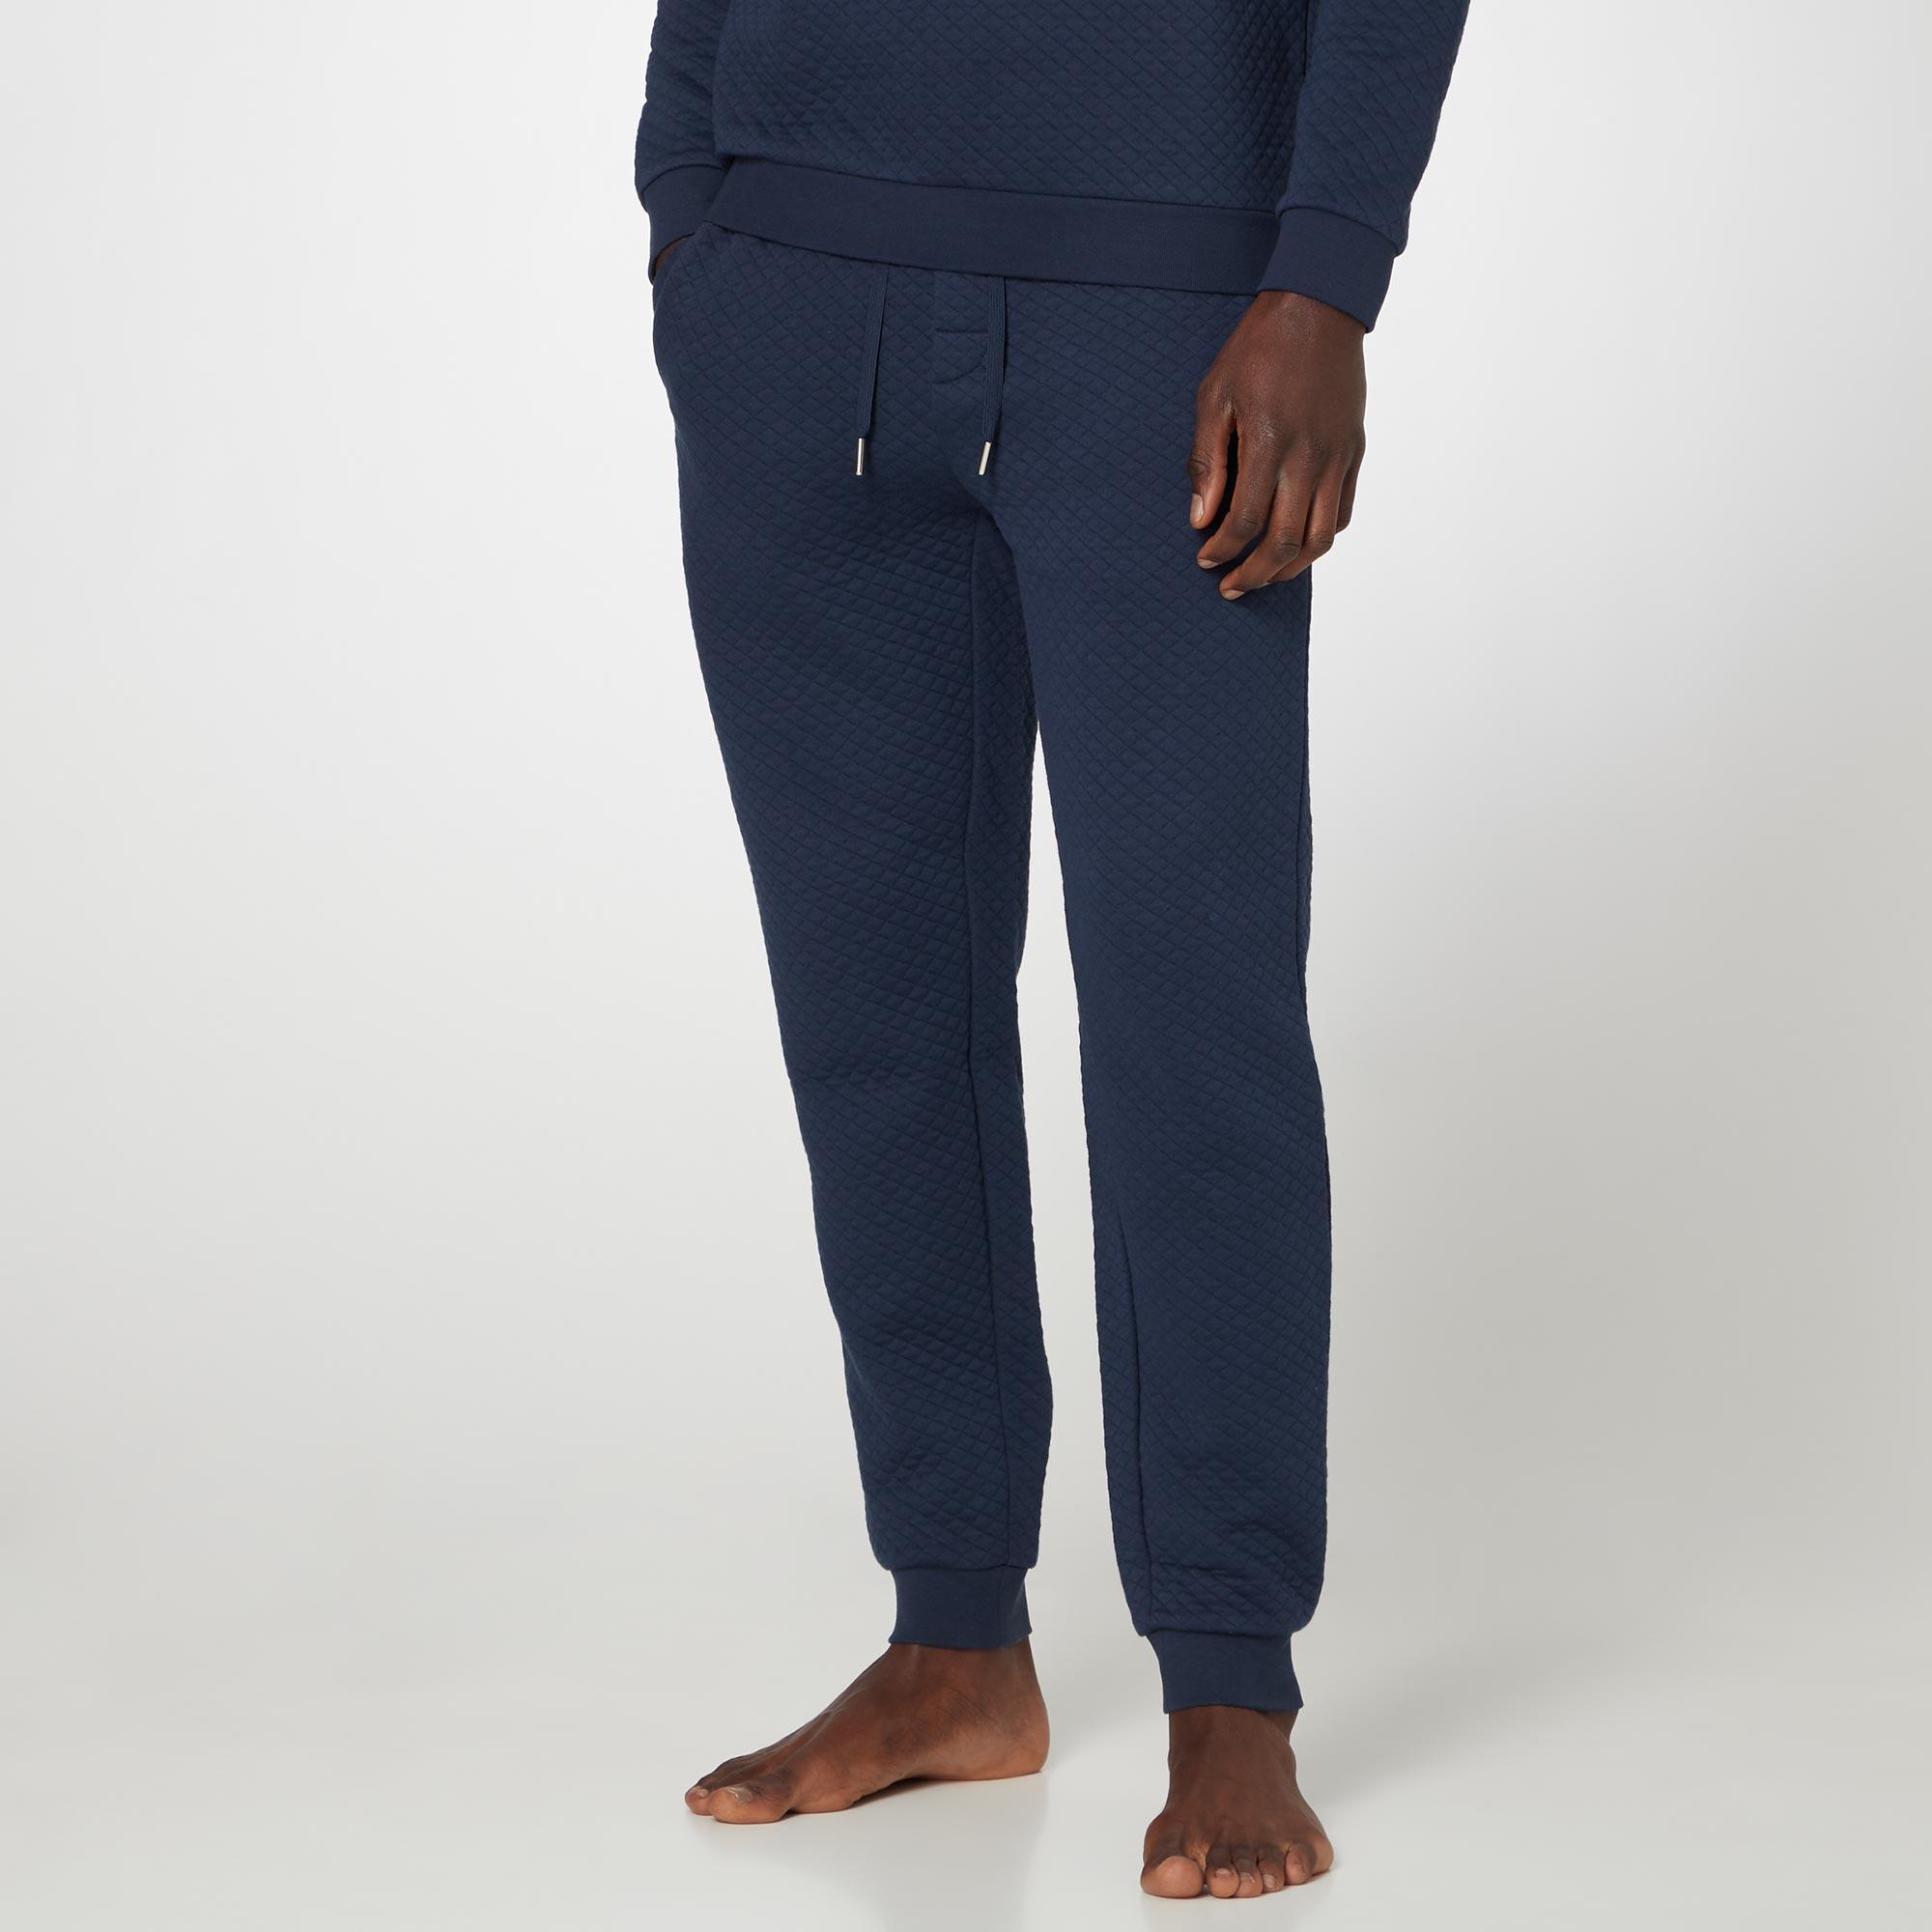 Contemporary Quilted Sweatpants